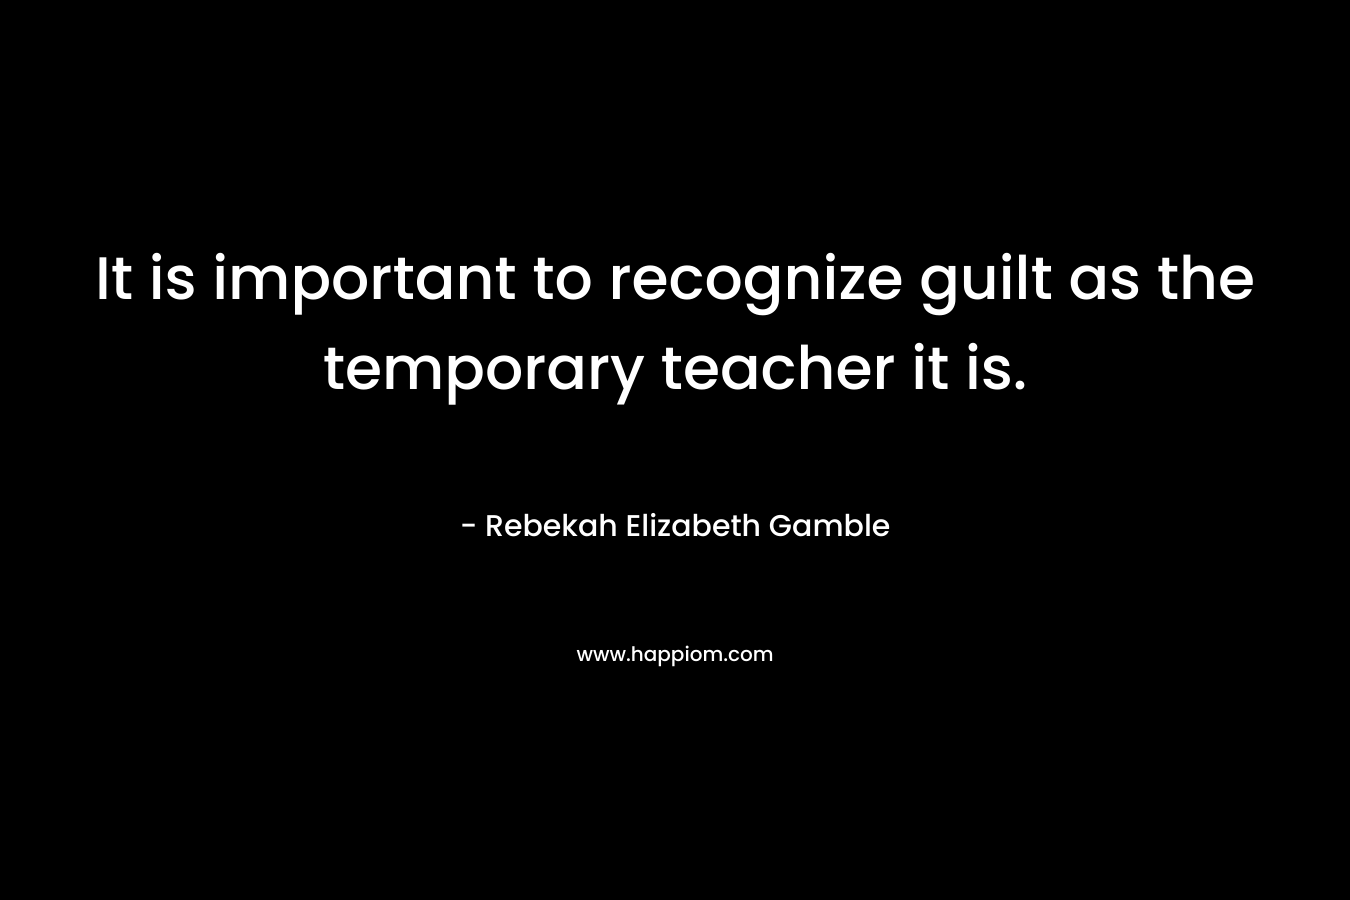 It is important to recognize guilt as the temporary teacher it is.